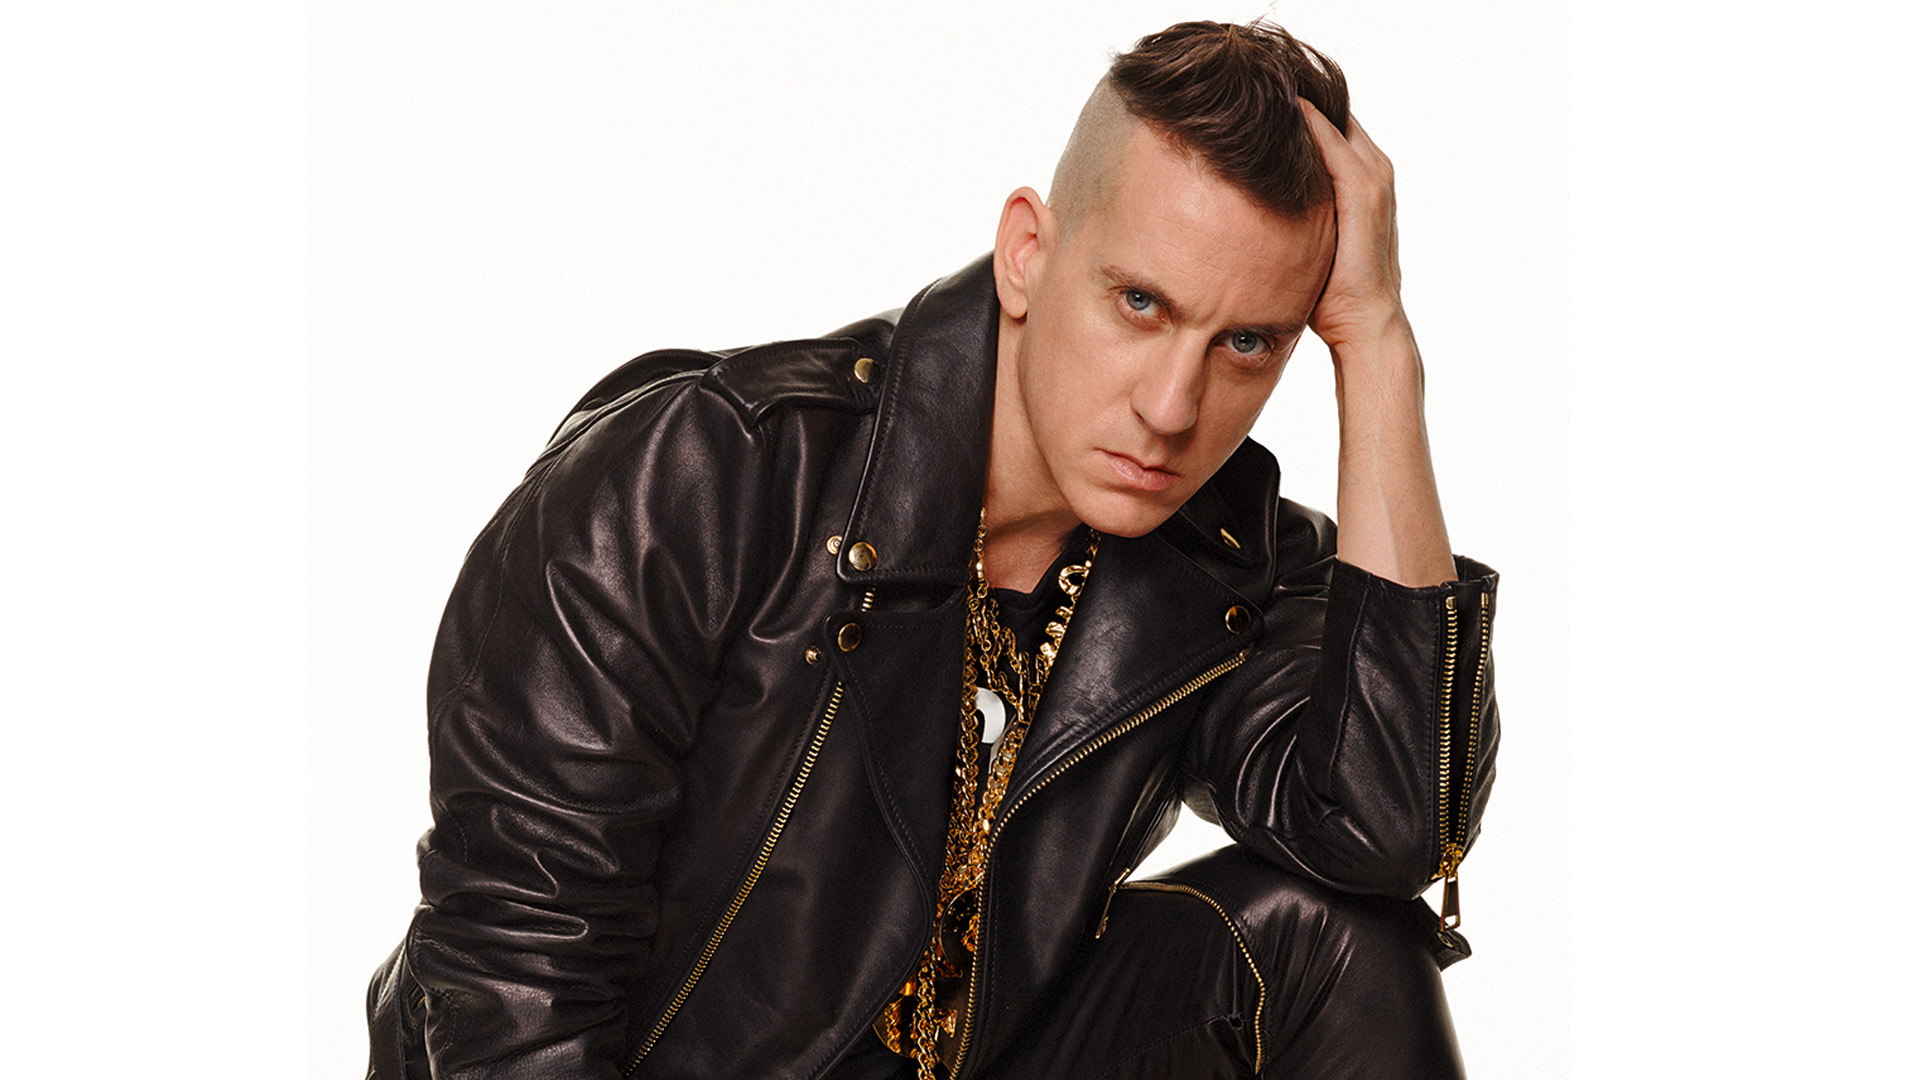 Jeremy Scott leaving Moschino after 10 years as Creative Director ...